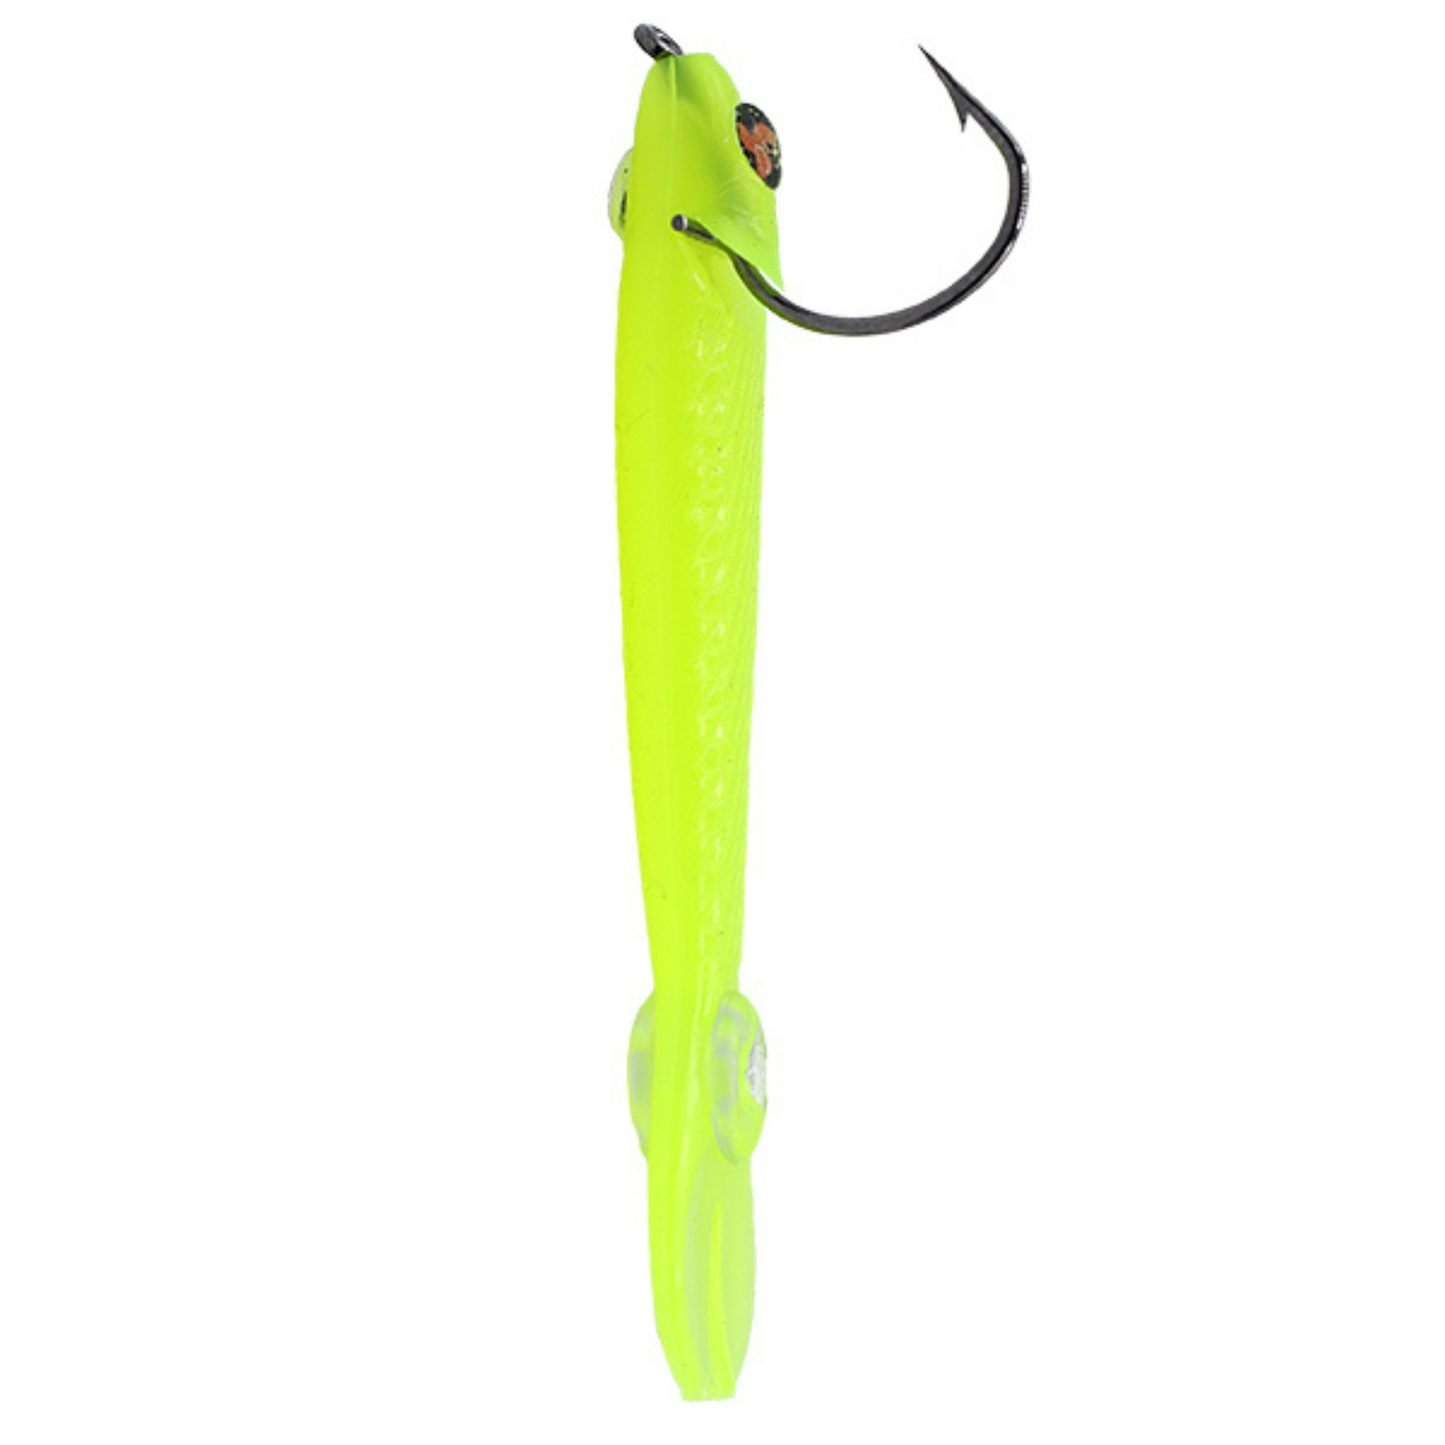 3.25" 5pc. Recoil Baits - Chartreuse